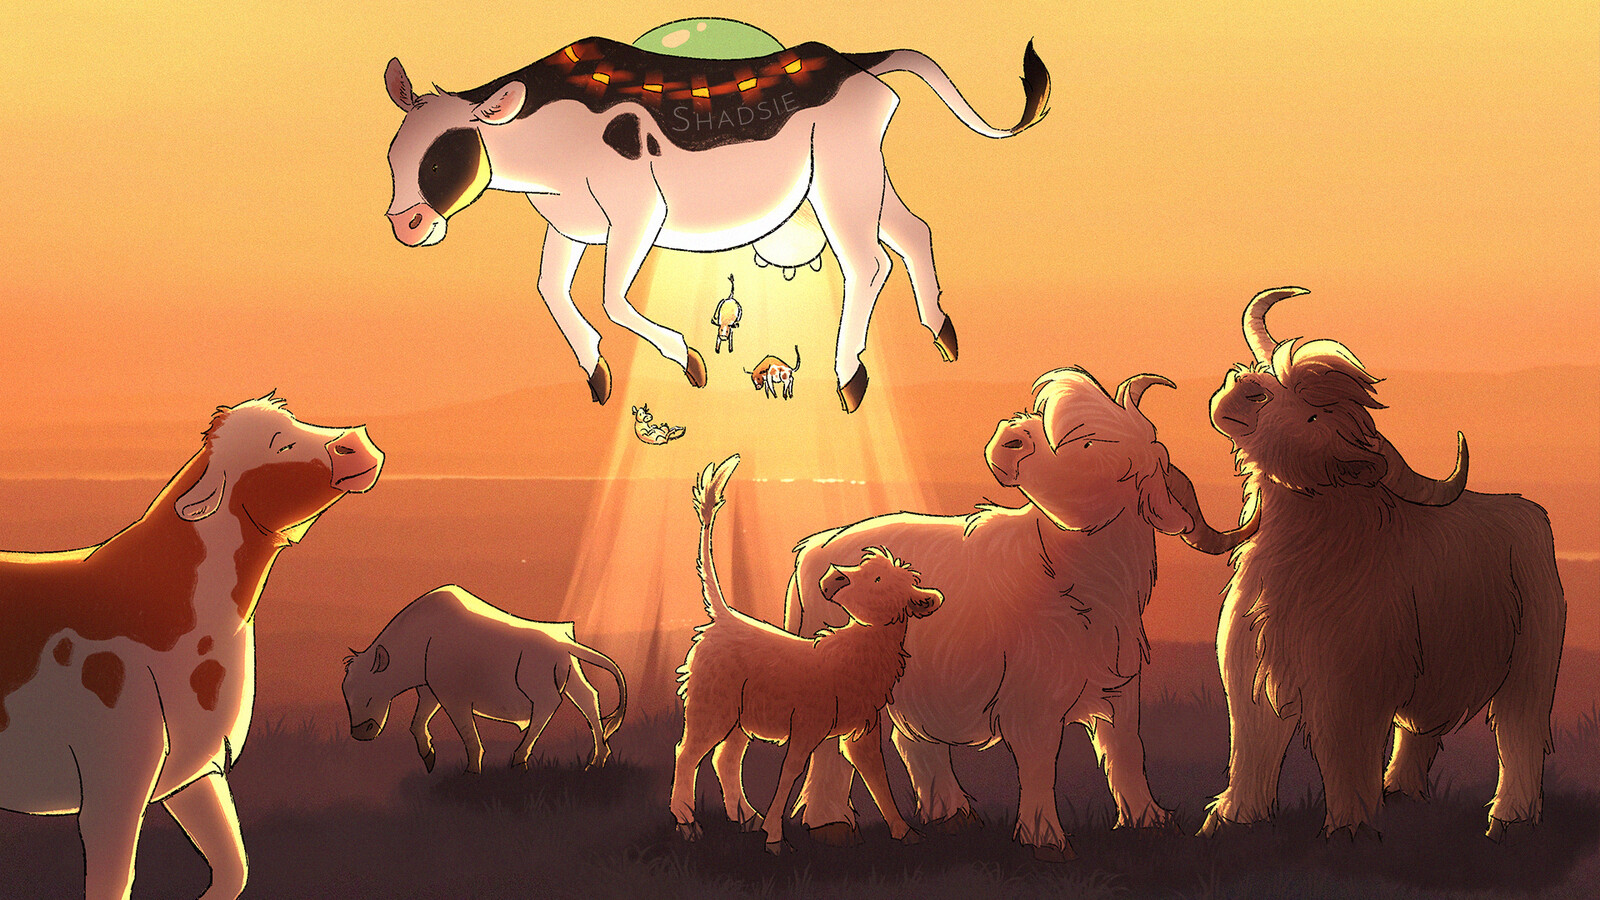 final illustration - alternative title 'Holy Cow'